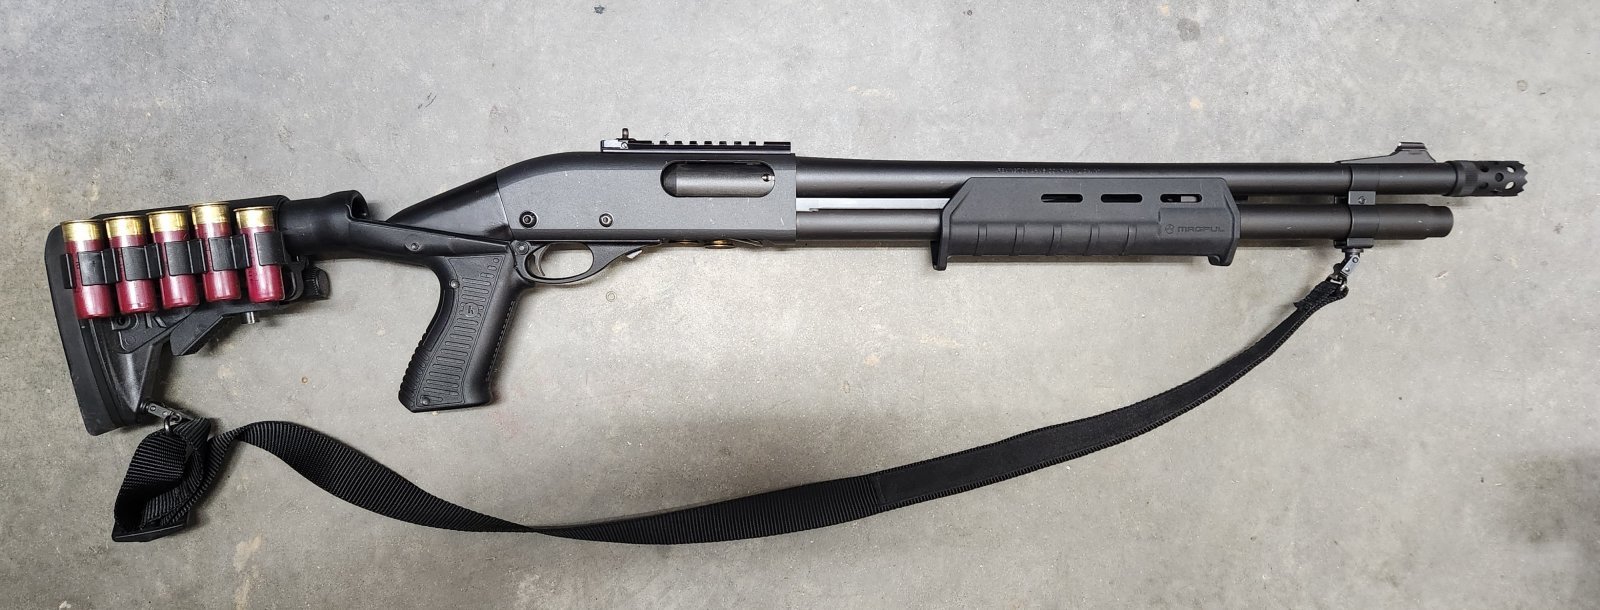 Remington 870 tactical - NEVER FIRED, with upgrades